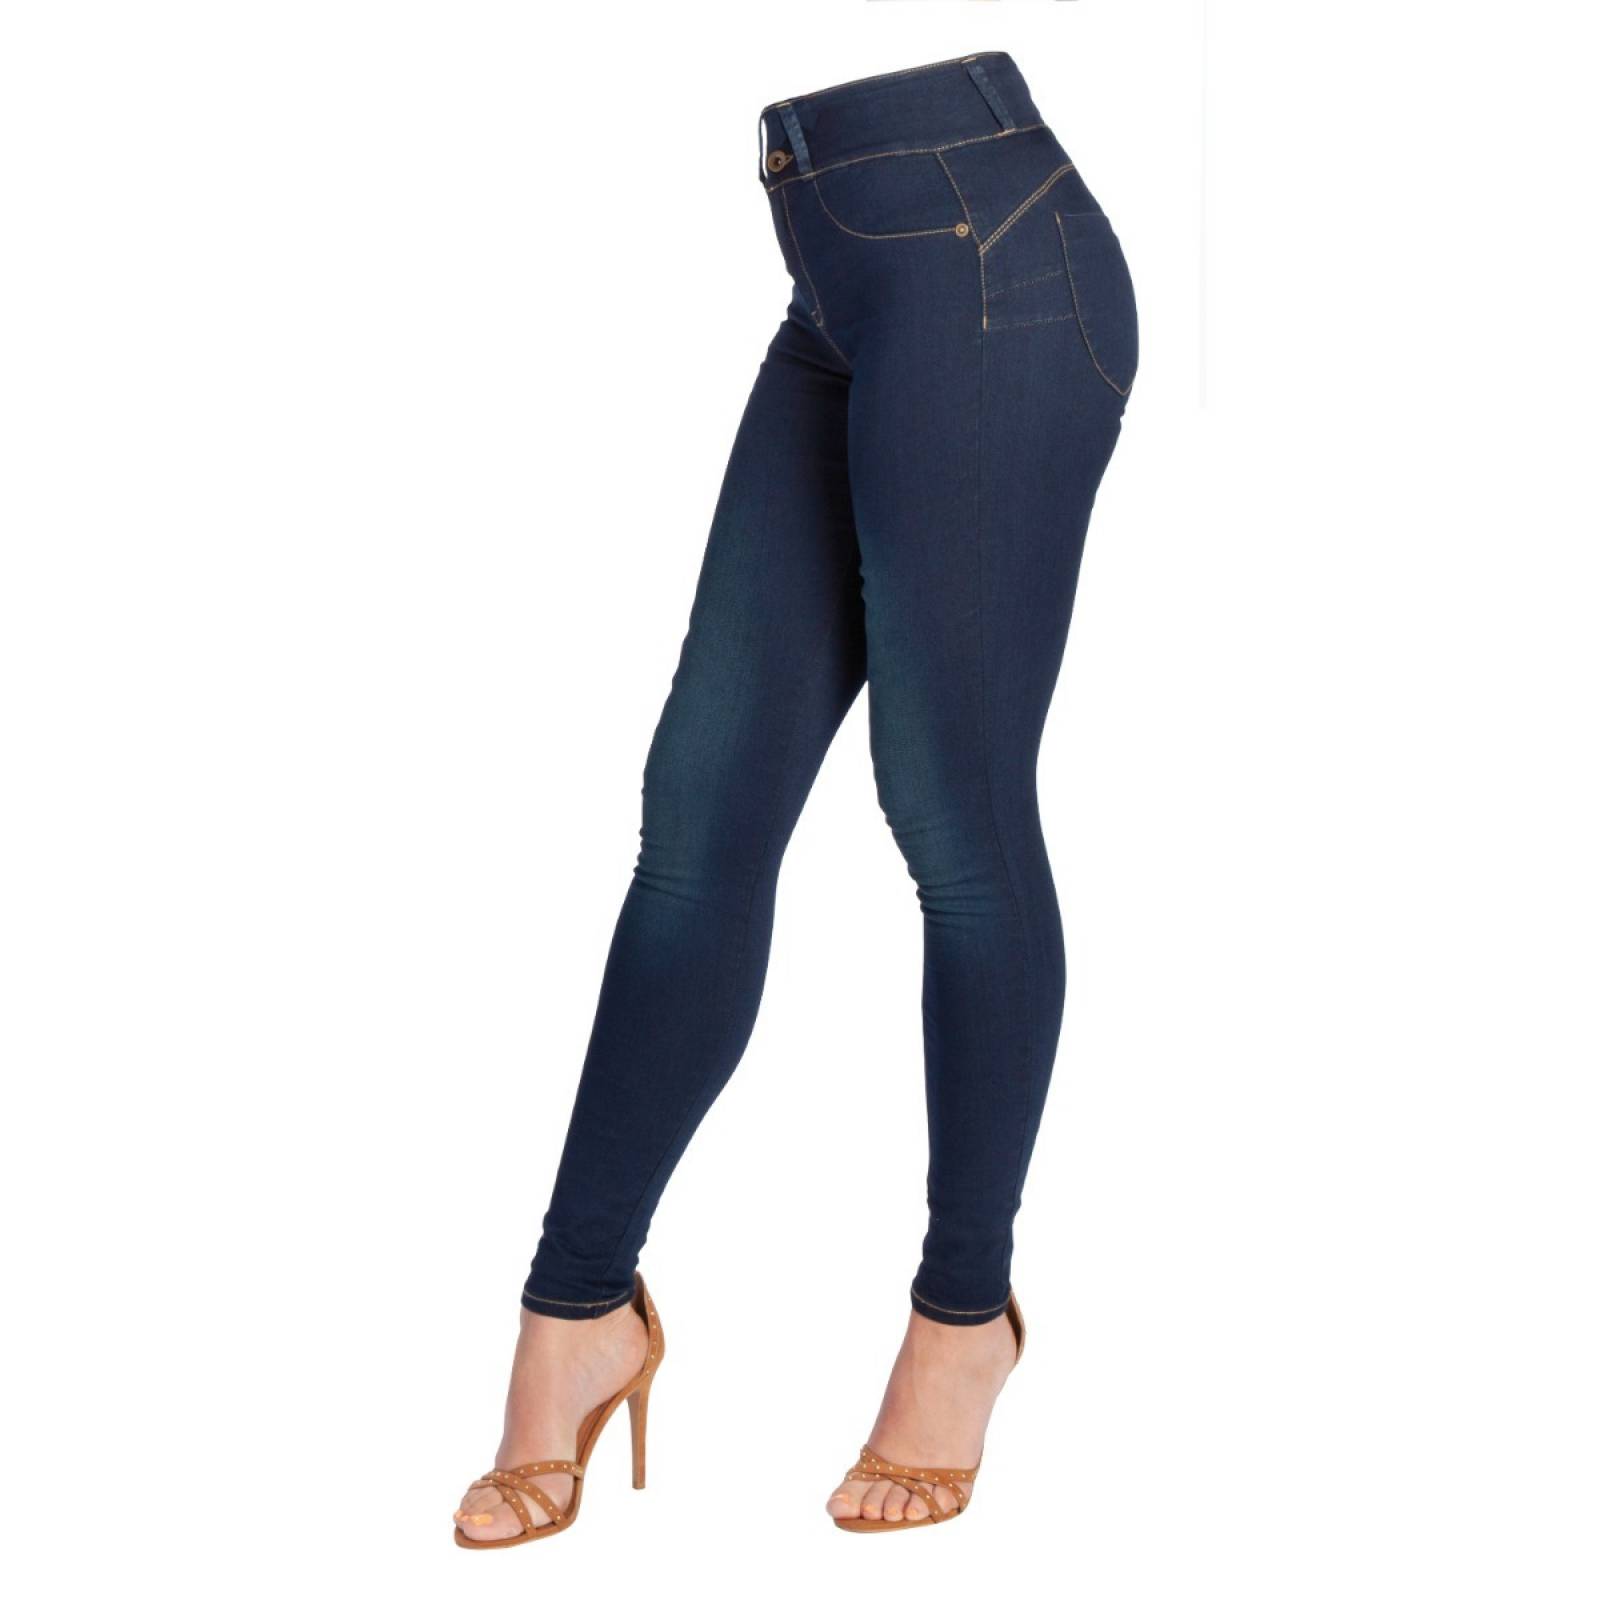 My Fit Jeans Pantalones Azul Oscuro Talla 14 A 20